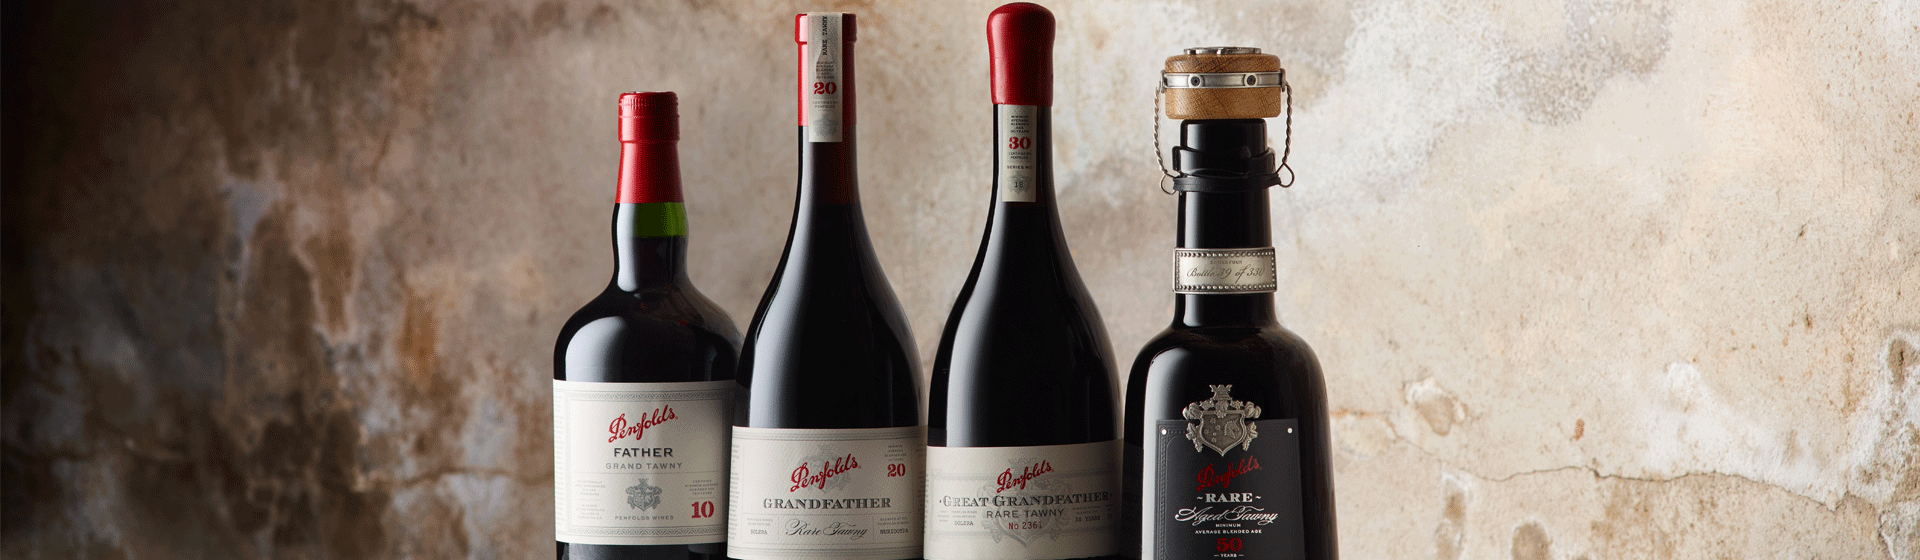 Penfolds Fortified article